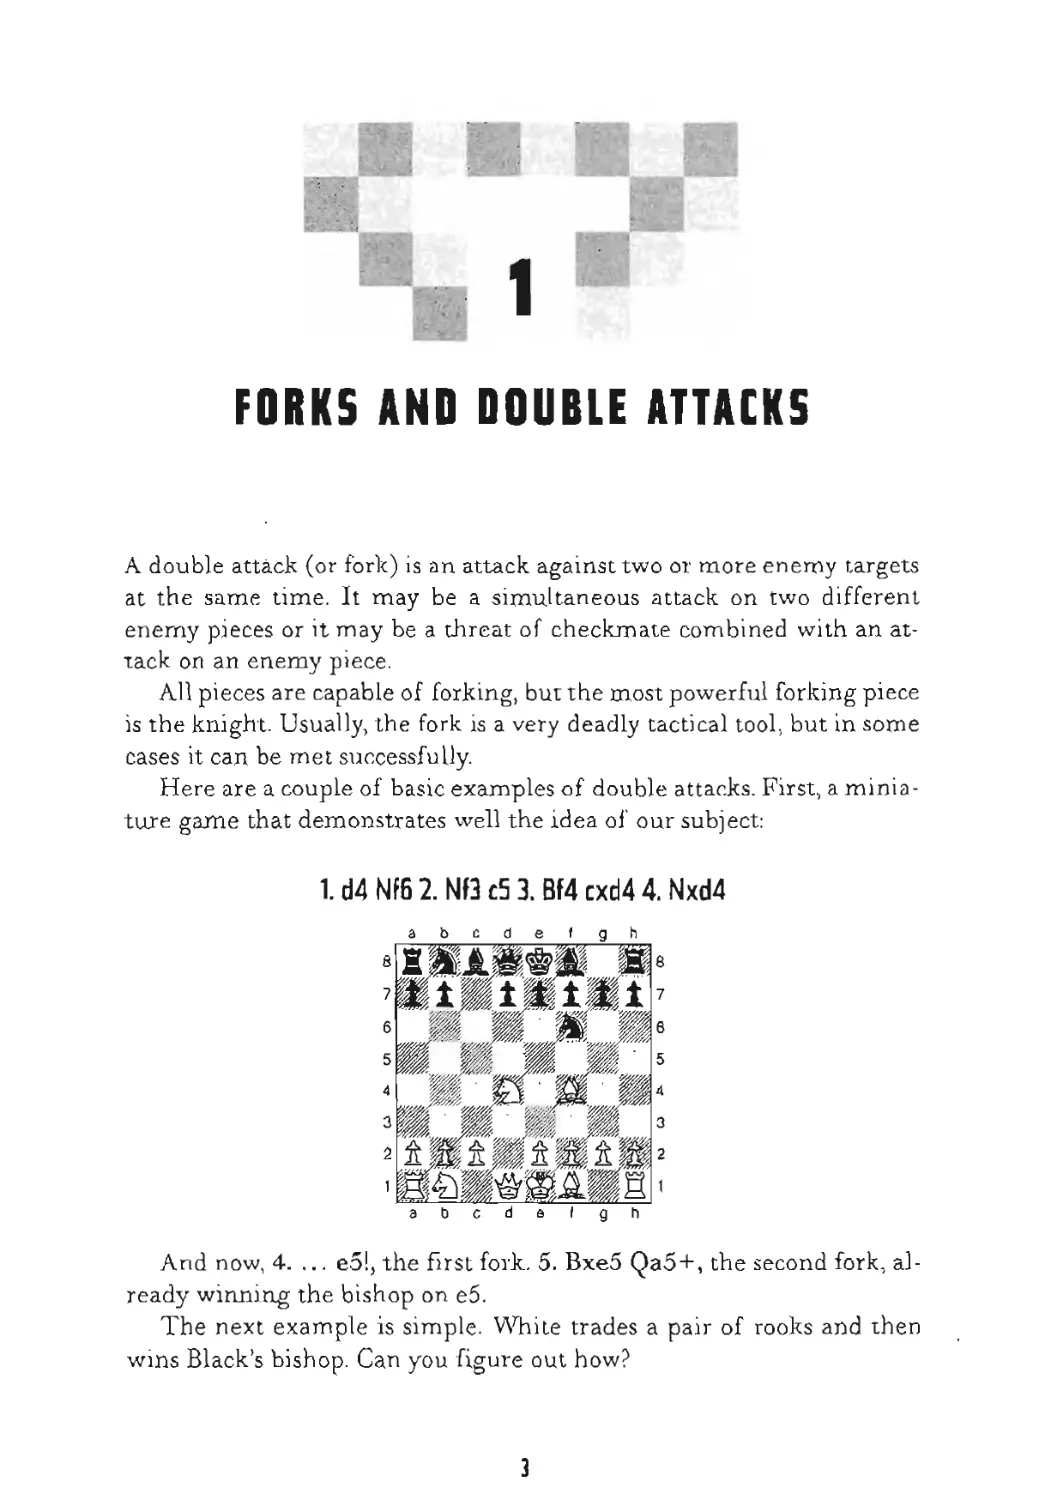 01 Forks and double attacks